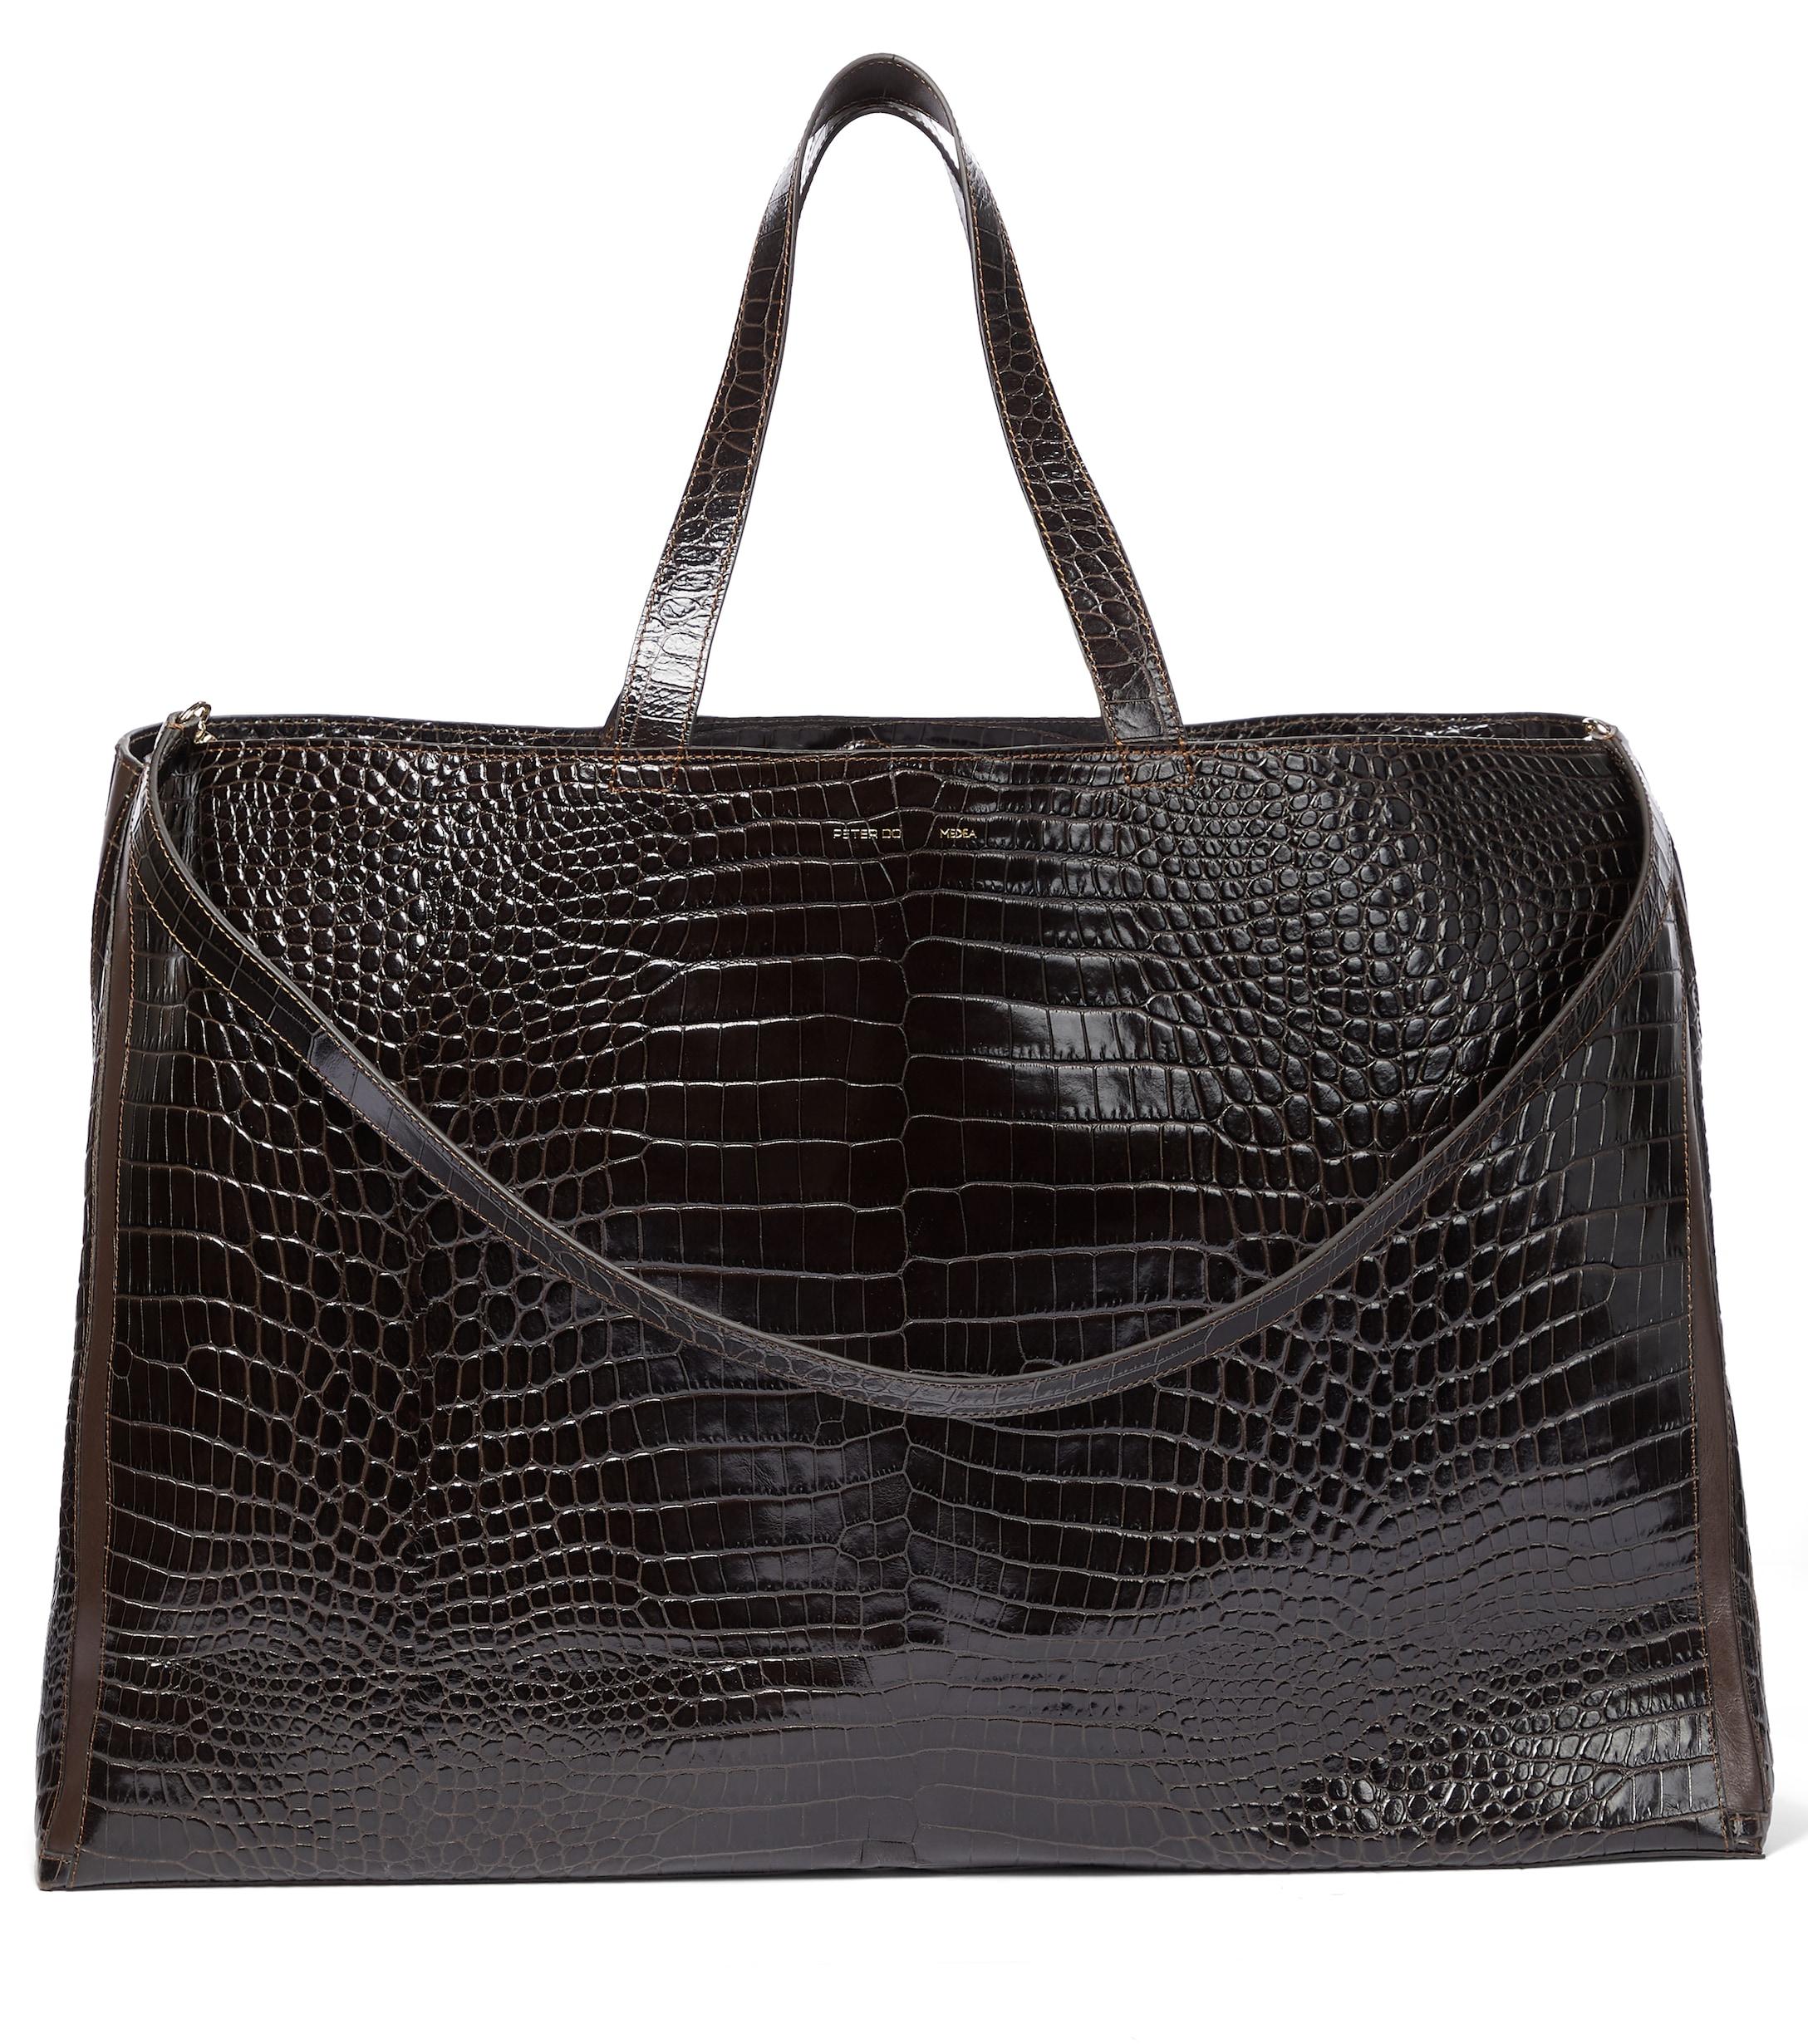 Peter Do X Medea Croc-effect Leather Tote in Brown | Lyst